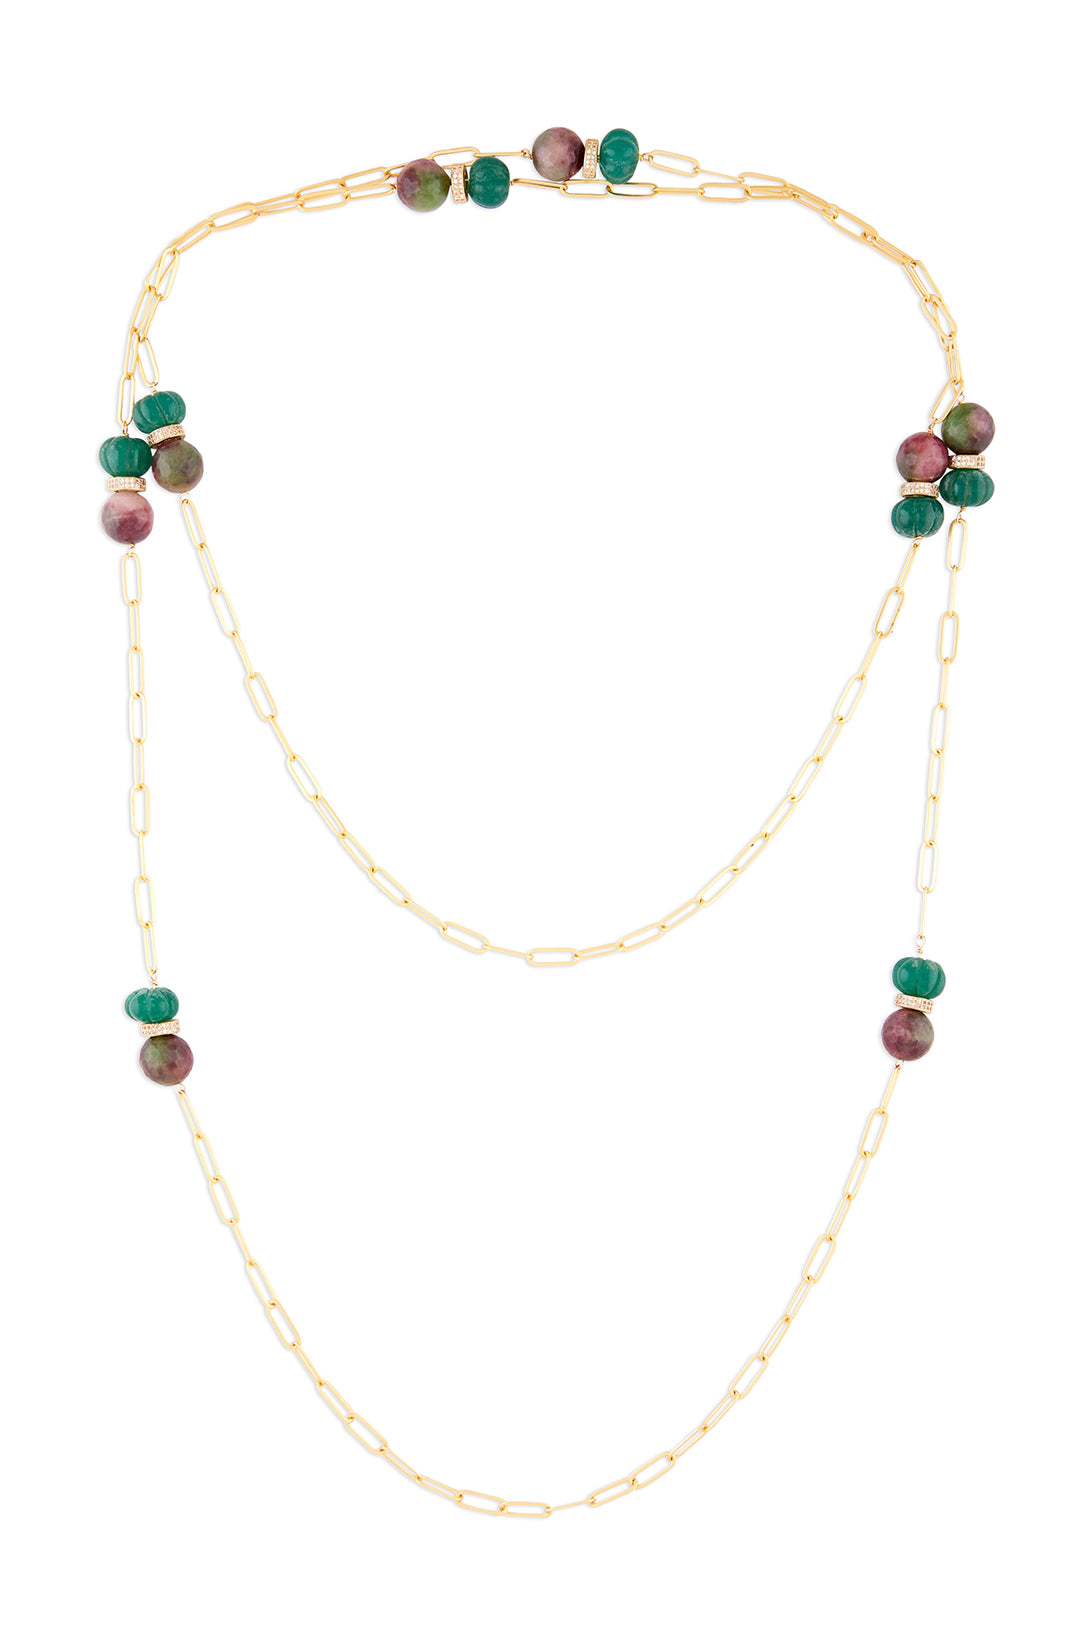 Gold Tone Layered Necklace With Multi-Colour Agates - Joules by Radhika